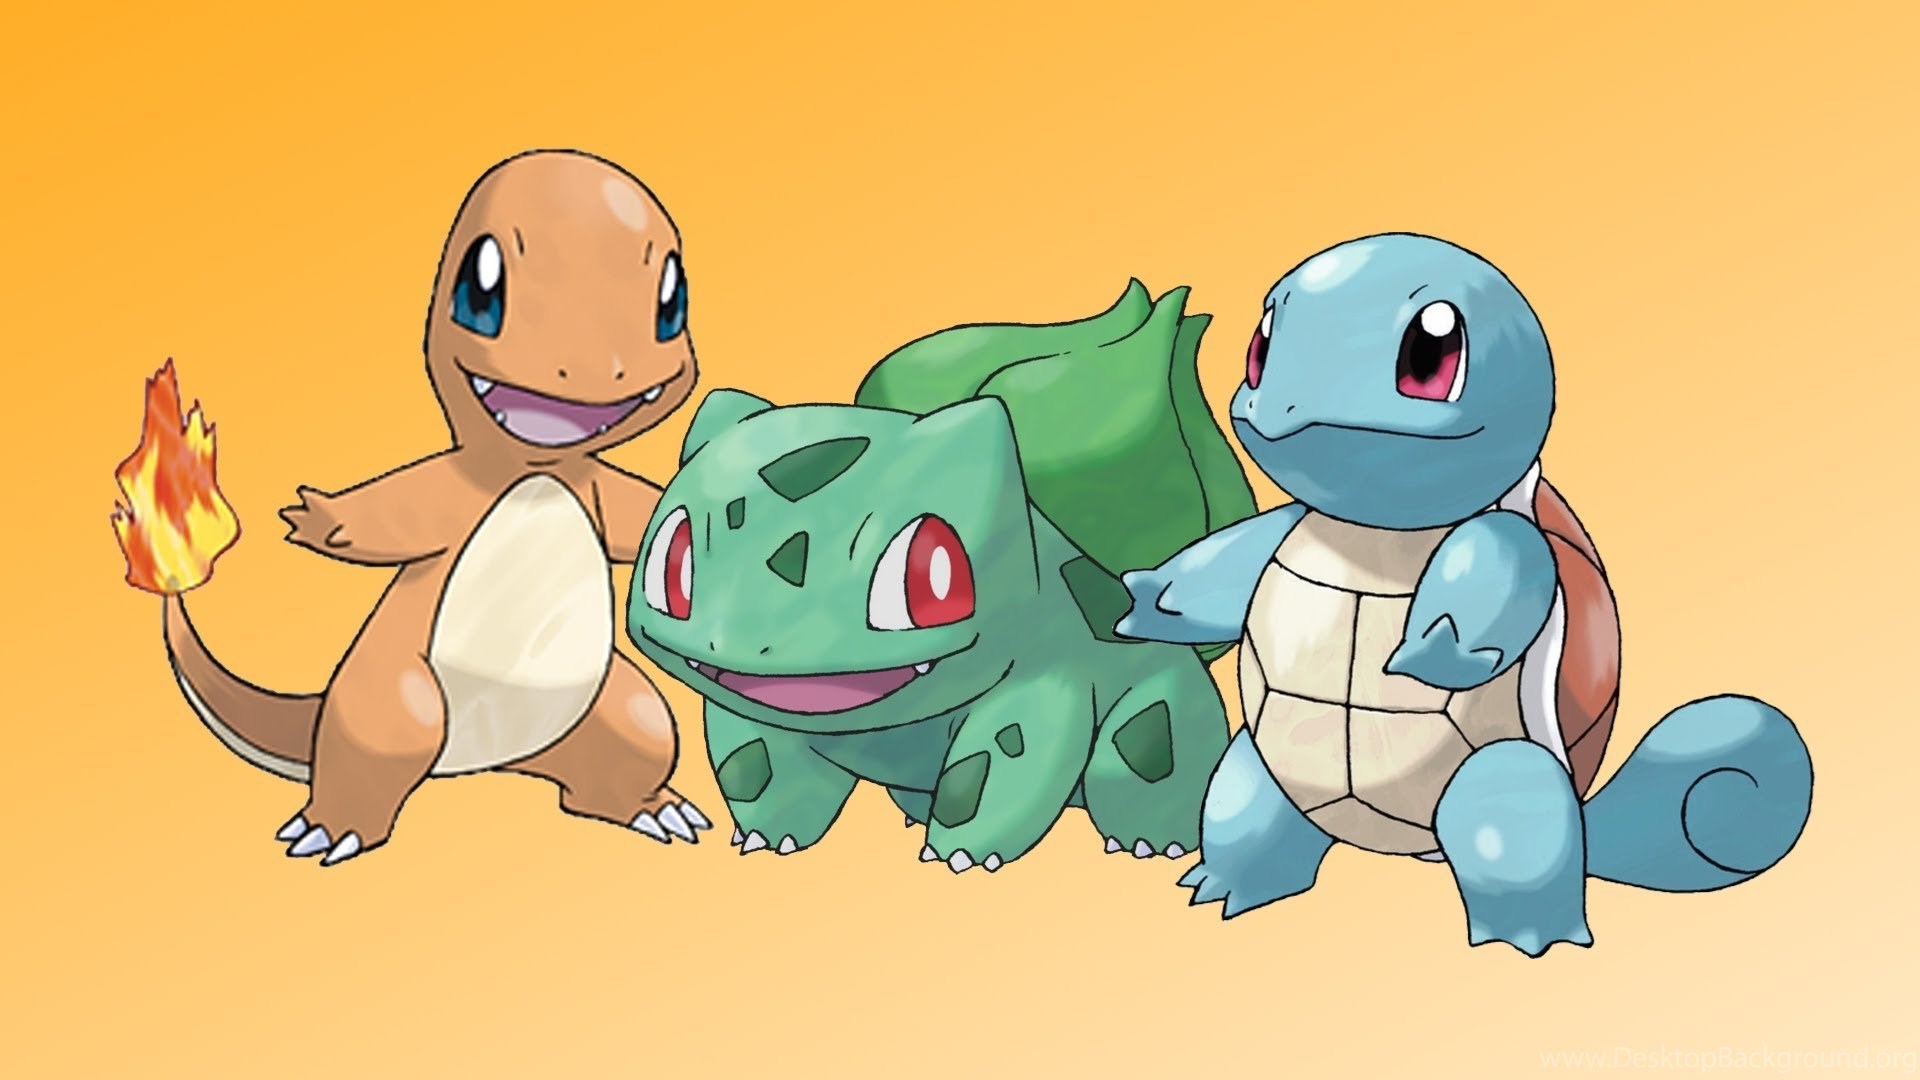 Bulbasaur Charmander Squirtle Wallpapers